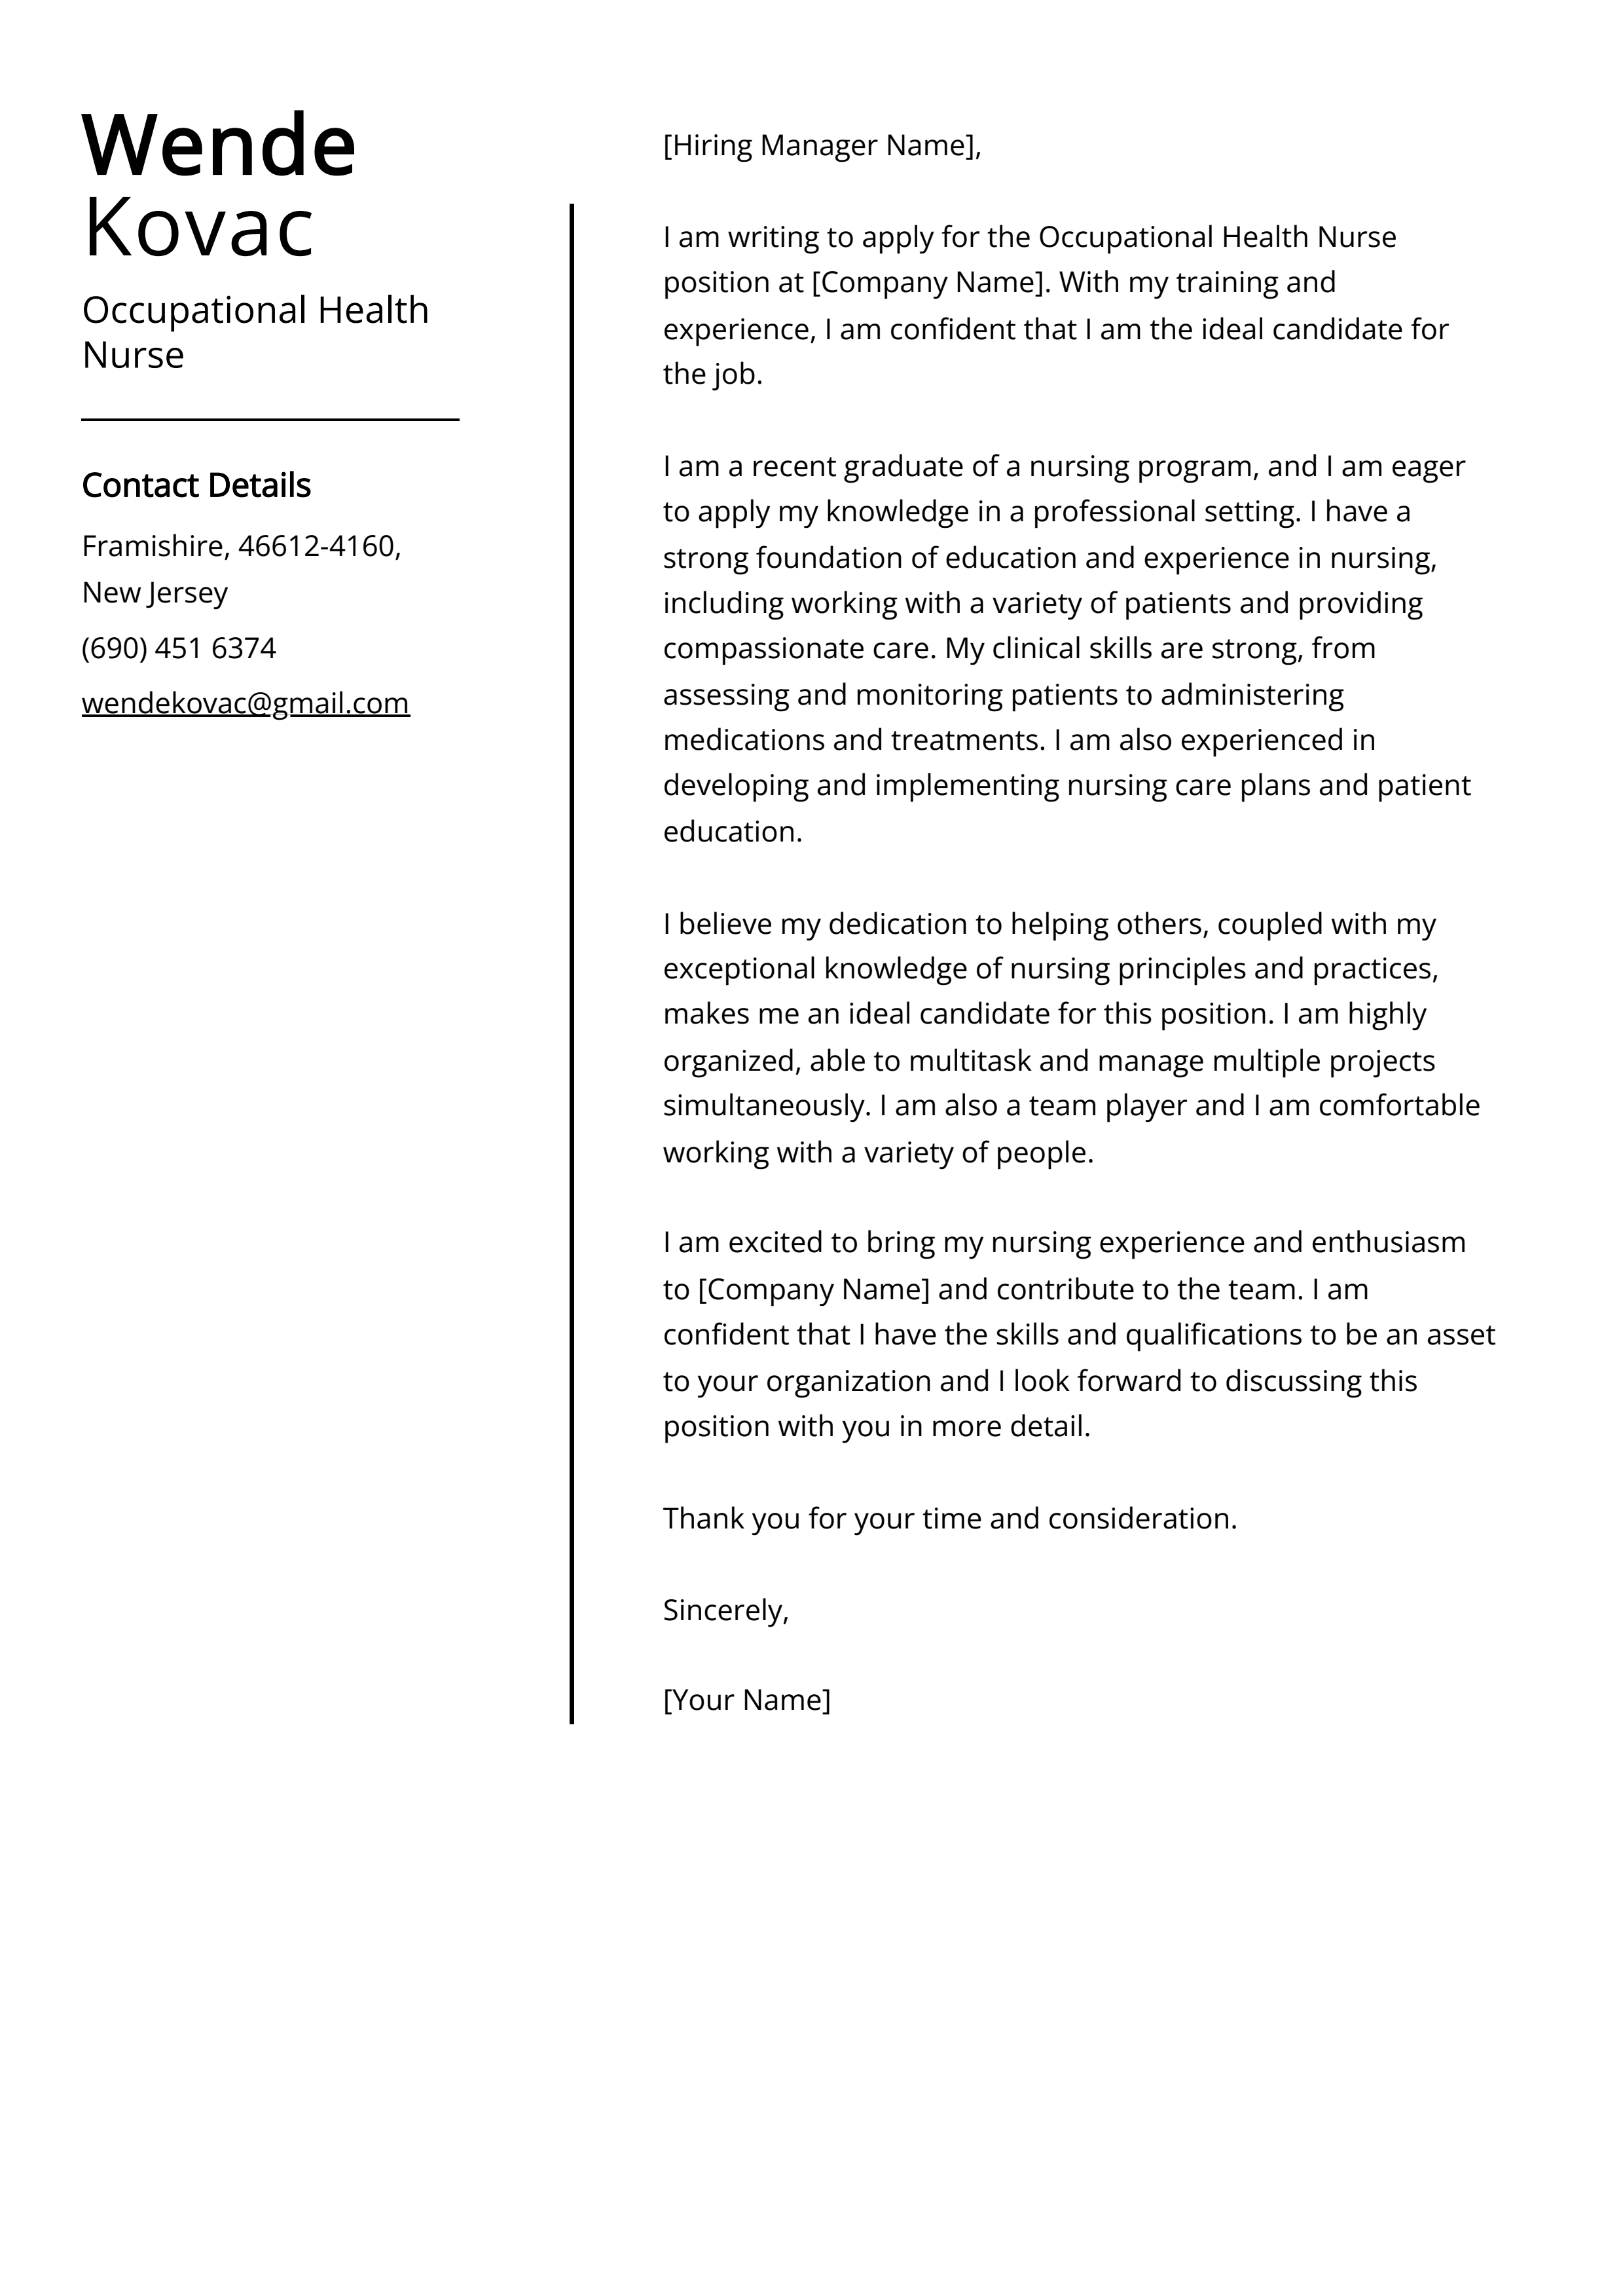 Occupational Health Nurse Cover Letter Example